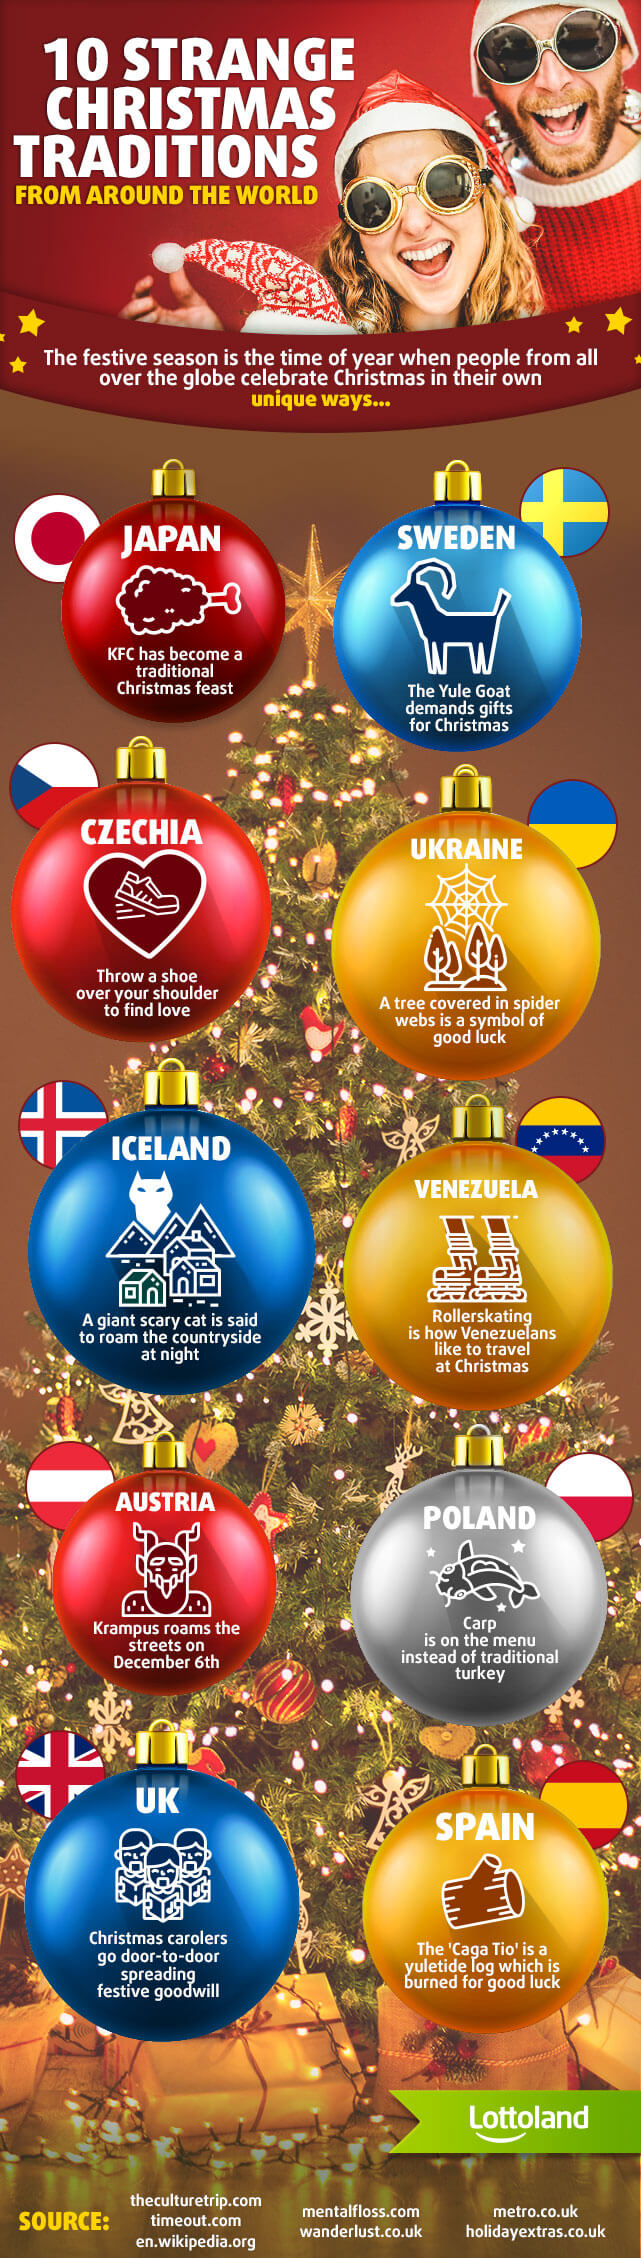 Strange Christmas Traditions From Around The World